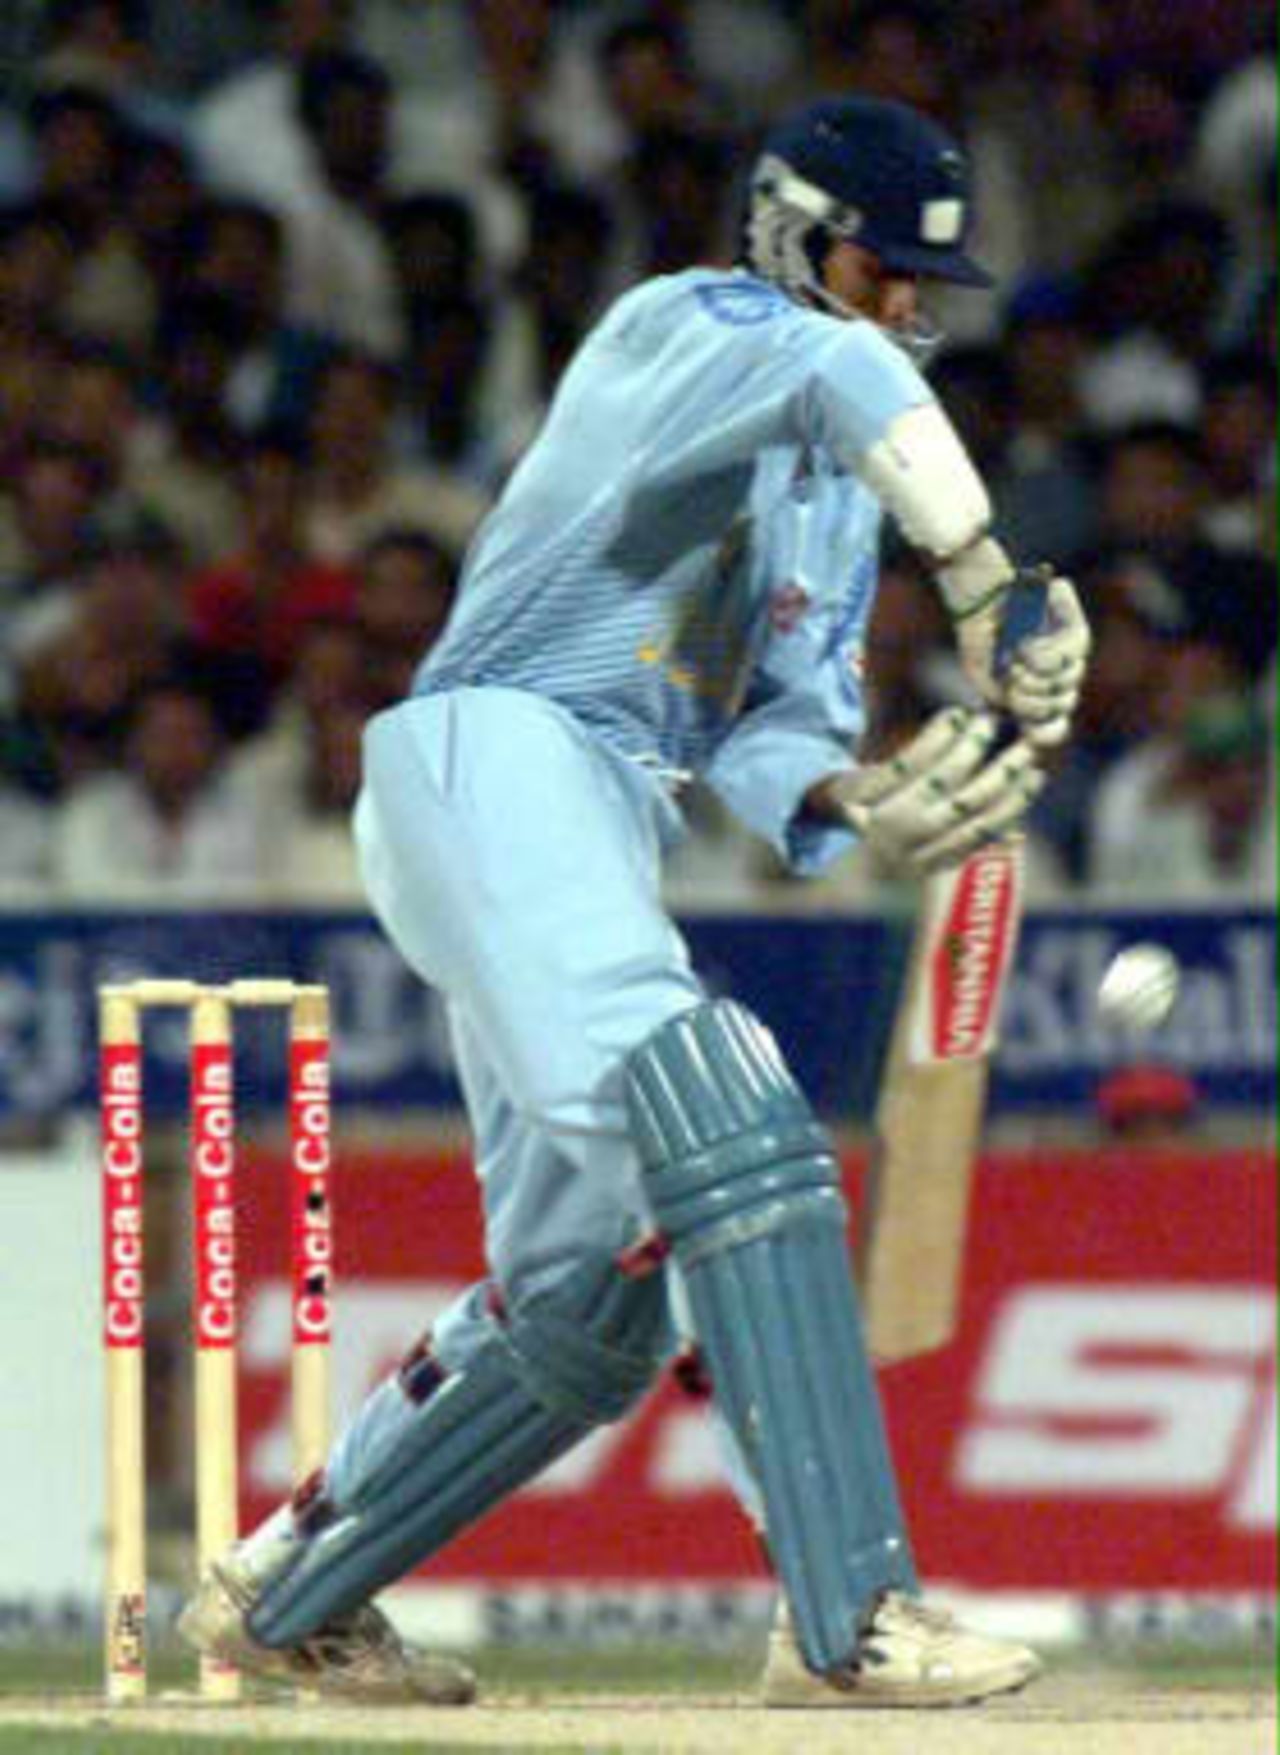 Opener S. Ramesh batting in the second match of the Coca Cola Cup held on 8th April in Sharjah